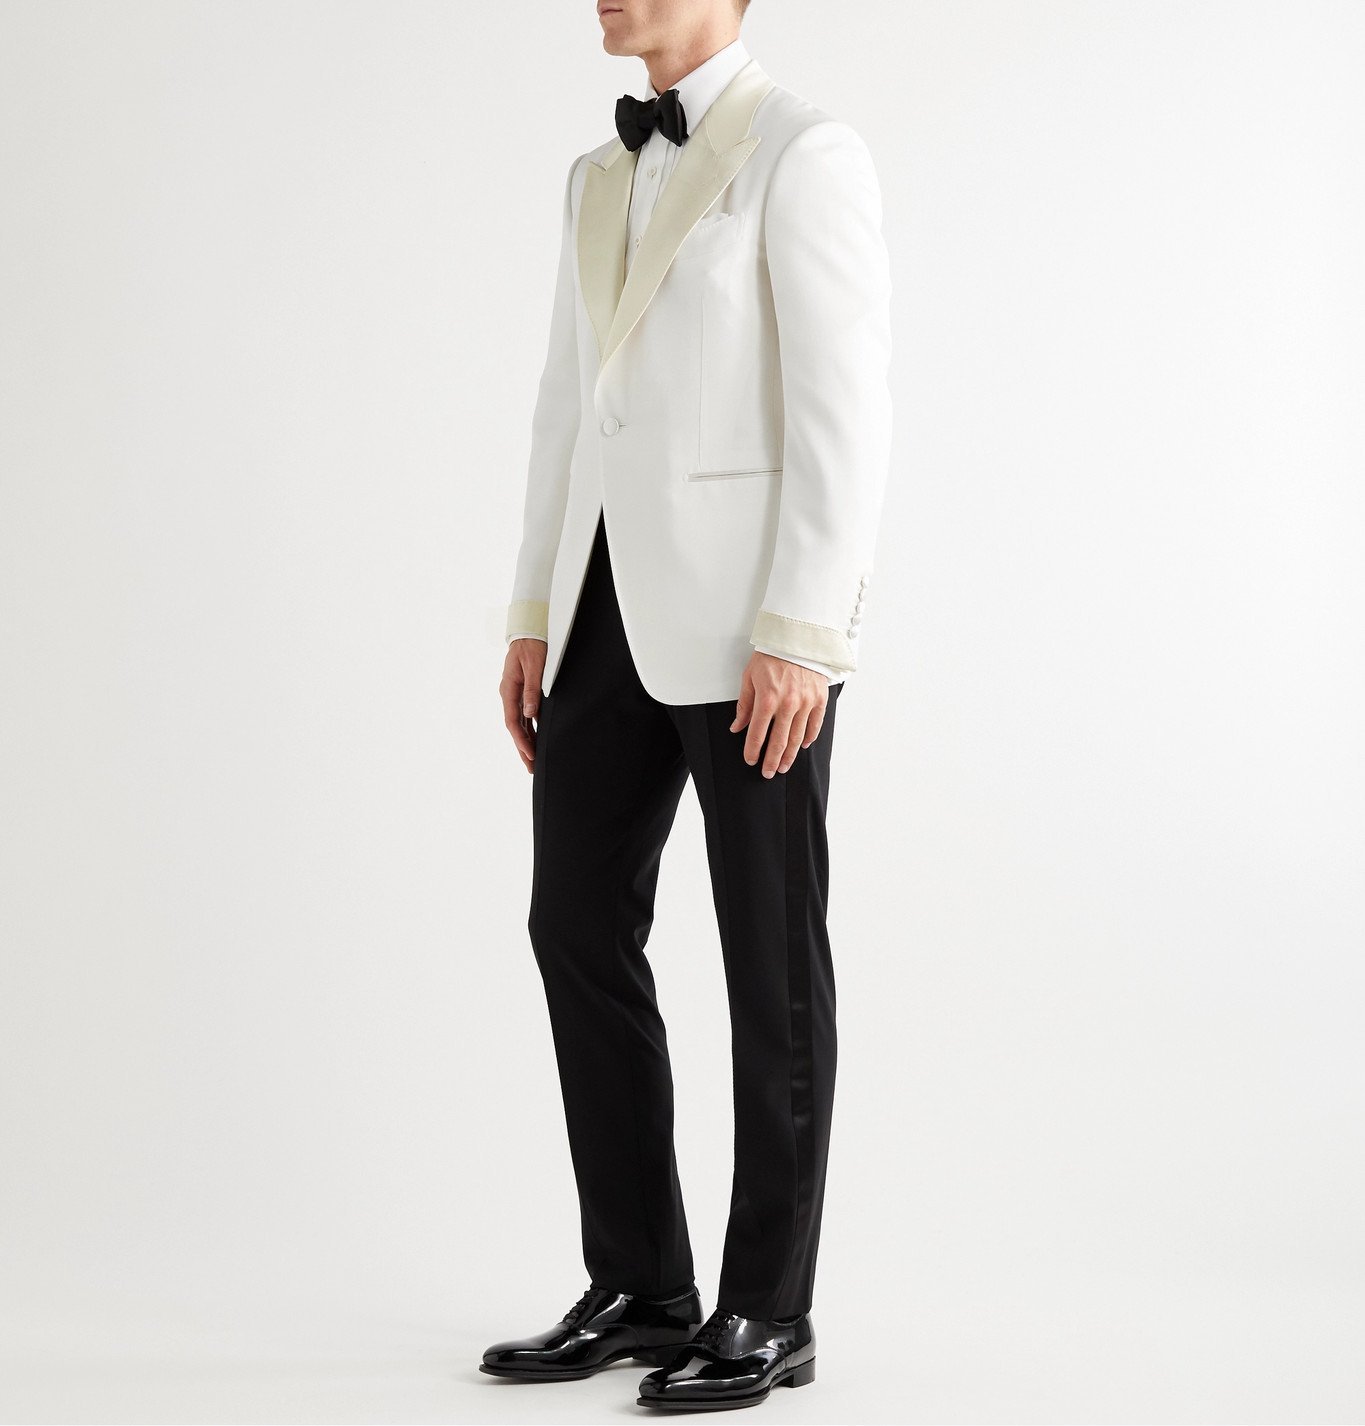 TOM FORD - Slim-Fit Satin-Trimmed Wool and Mohair-Blend Tuxedo Jacket -  Neutrals TOM FORD